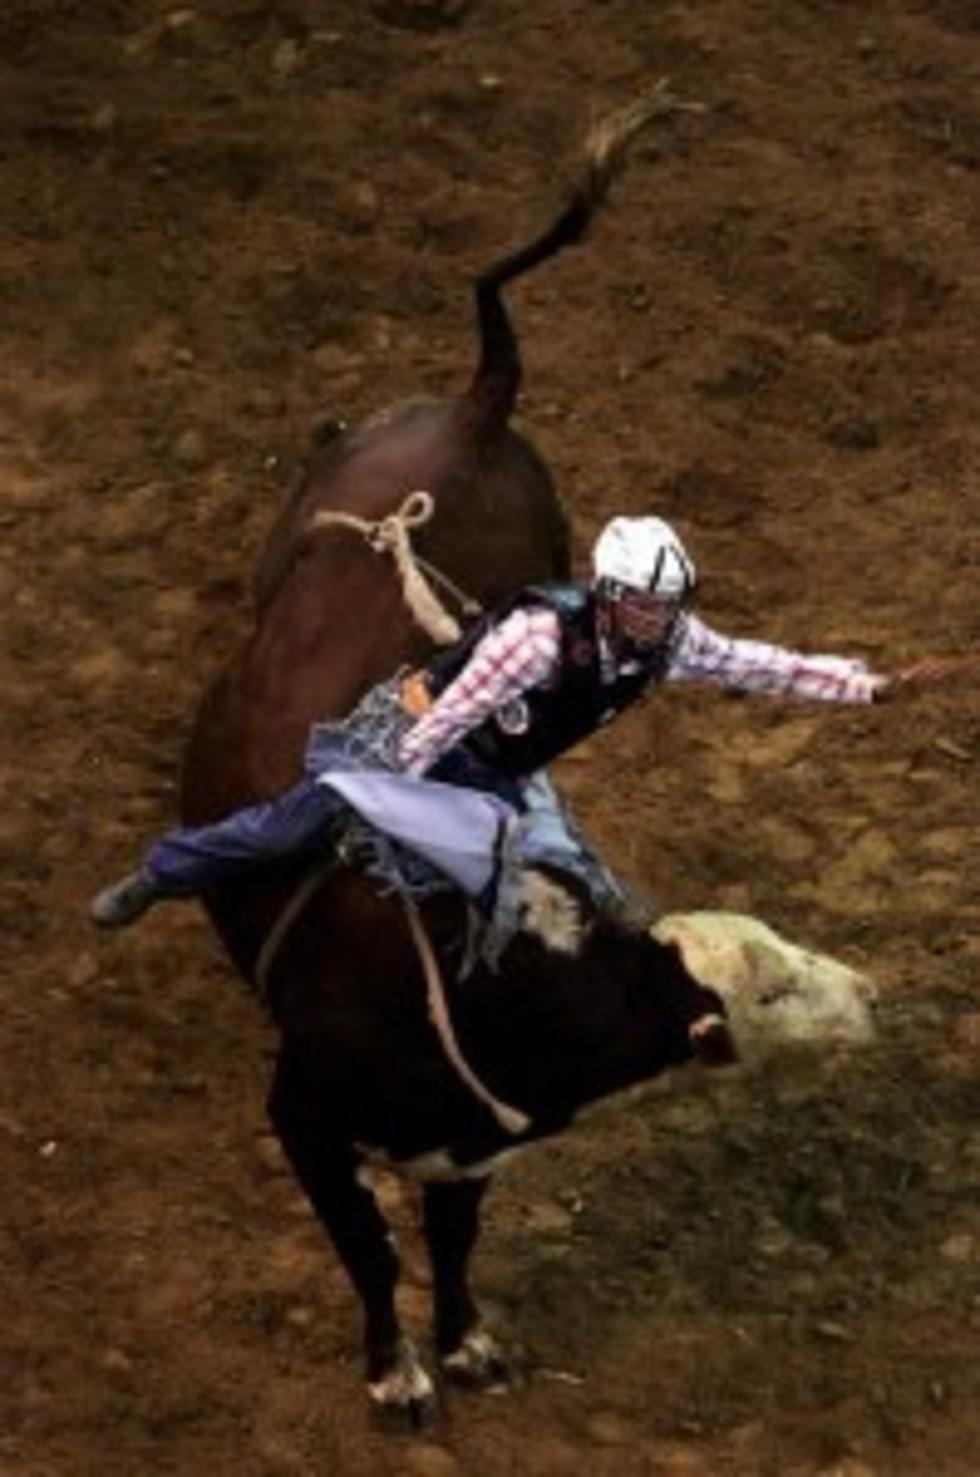 Are Bull Riders the Pound for Pound Toughest Athletes? [POLL]